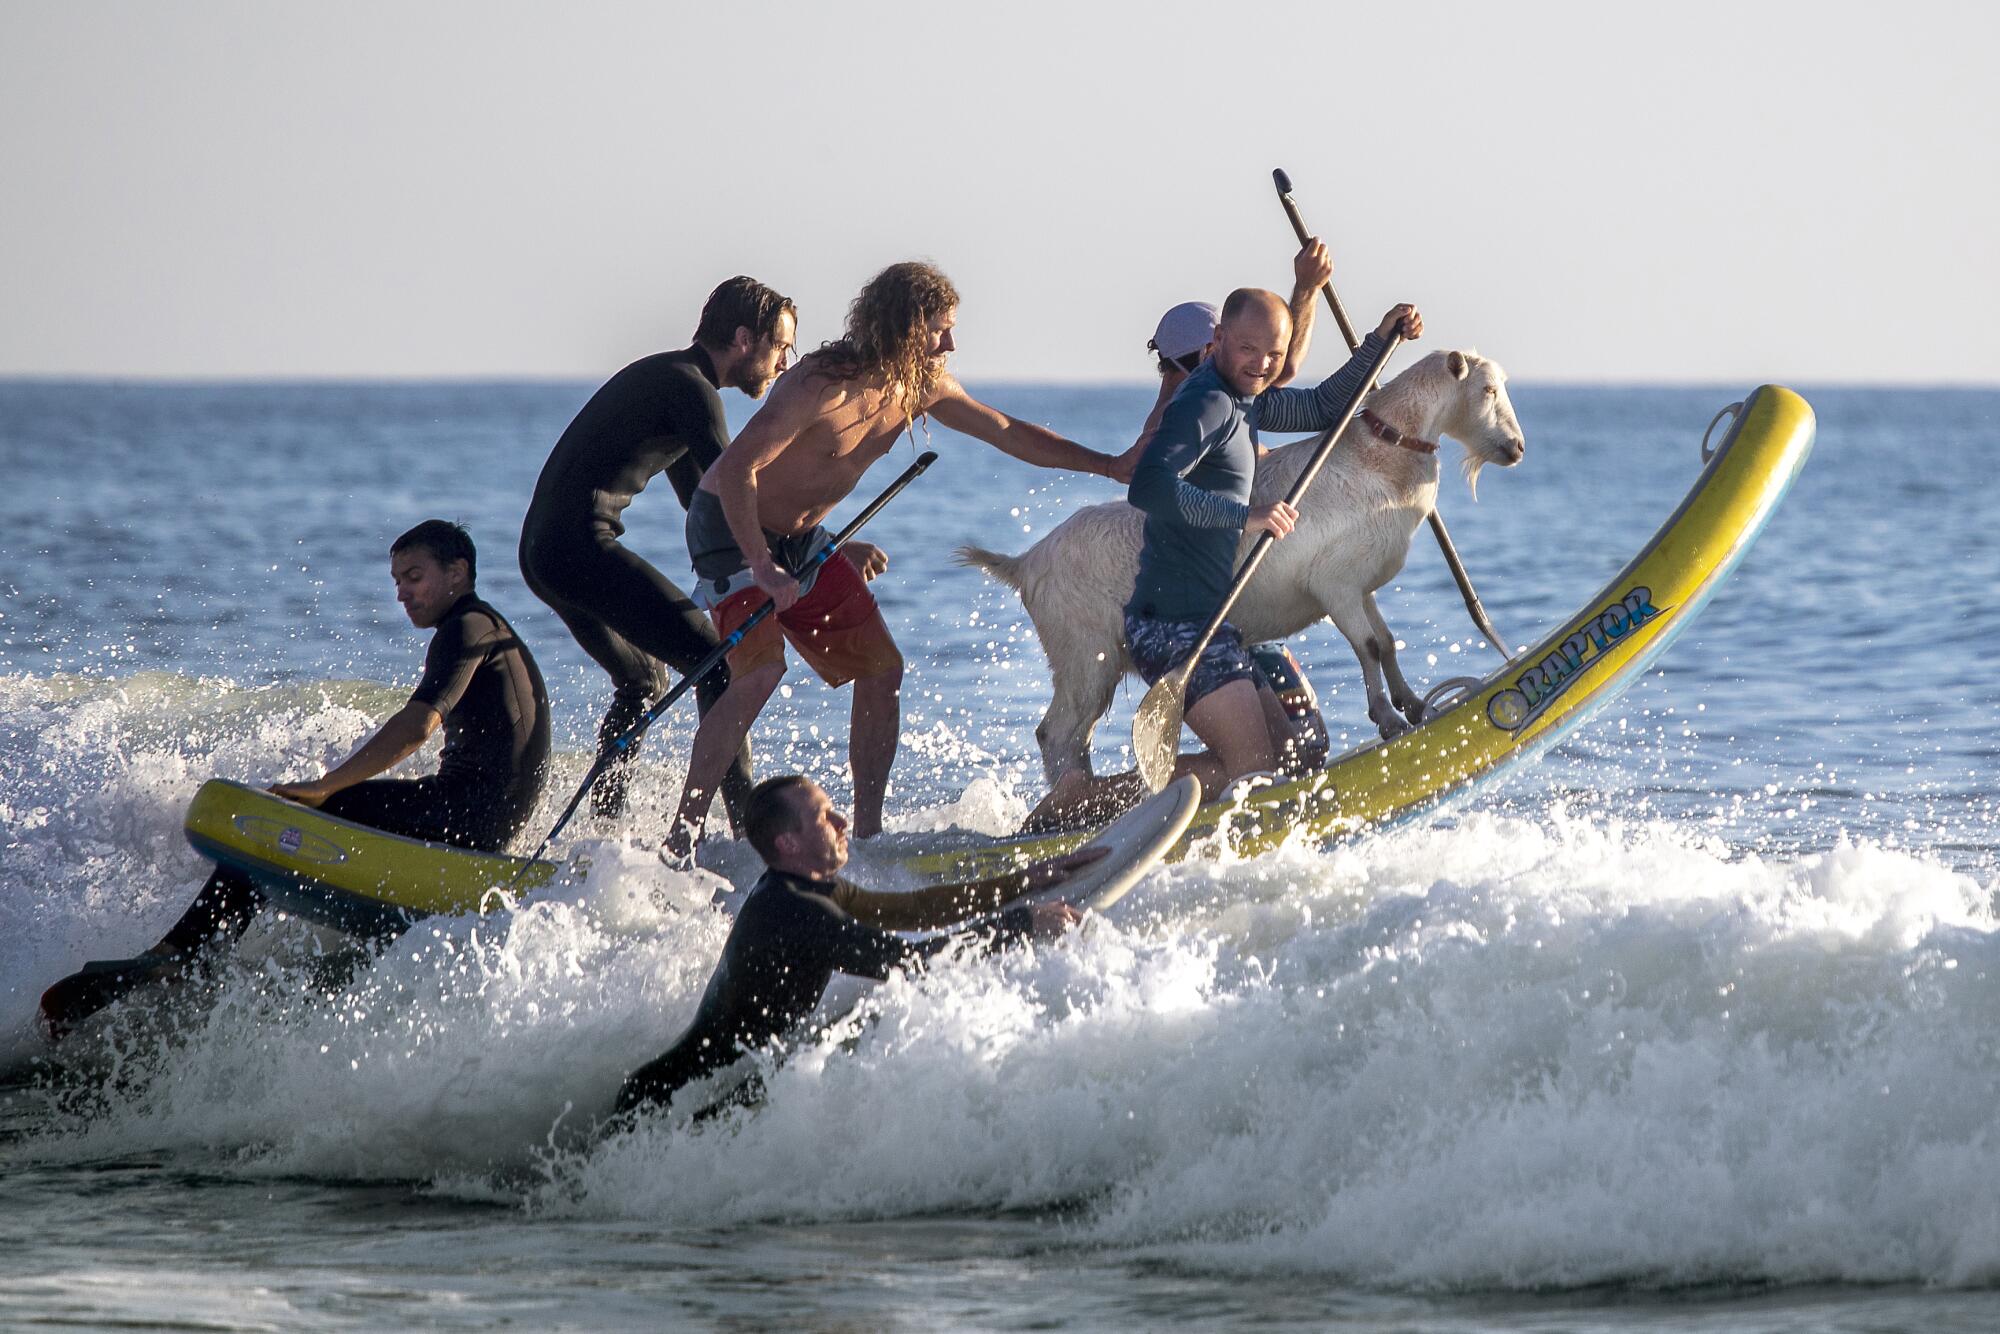 Dana McGregor, left front, owner of the Surfing Goats of Pismo Beach, and others surf with a goat named Pismo the Kid